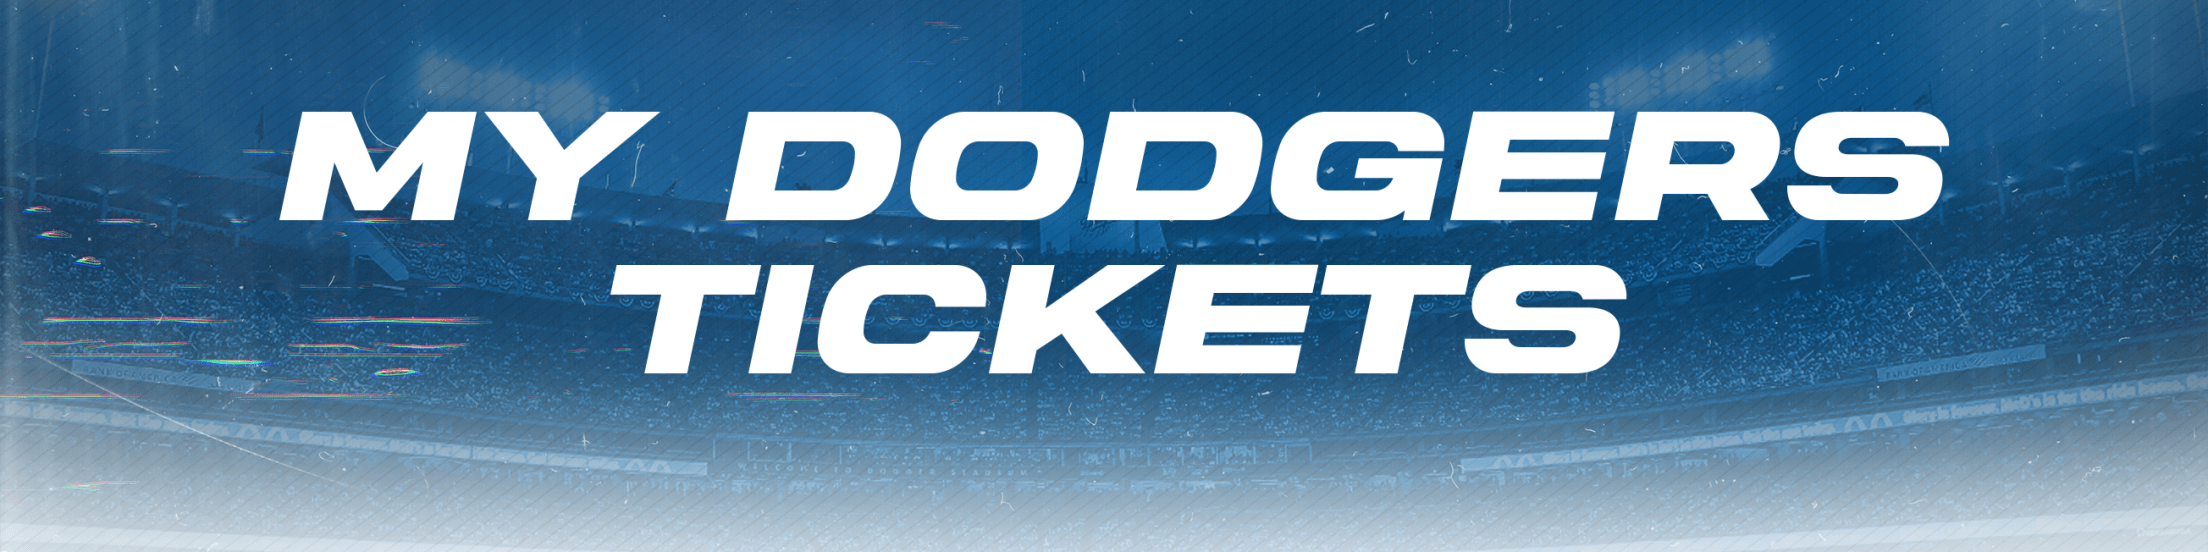 Landing Page: Easy Access to 'Inside the Dodgers' Ongoing Series